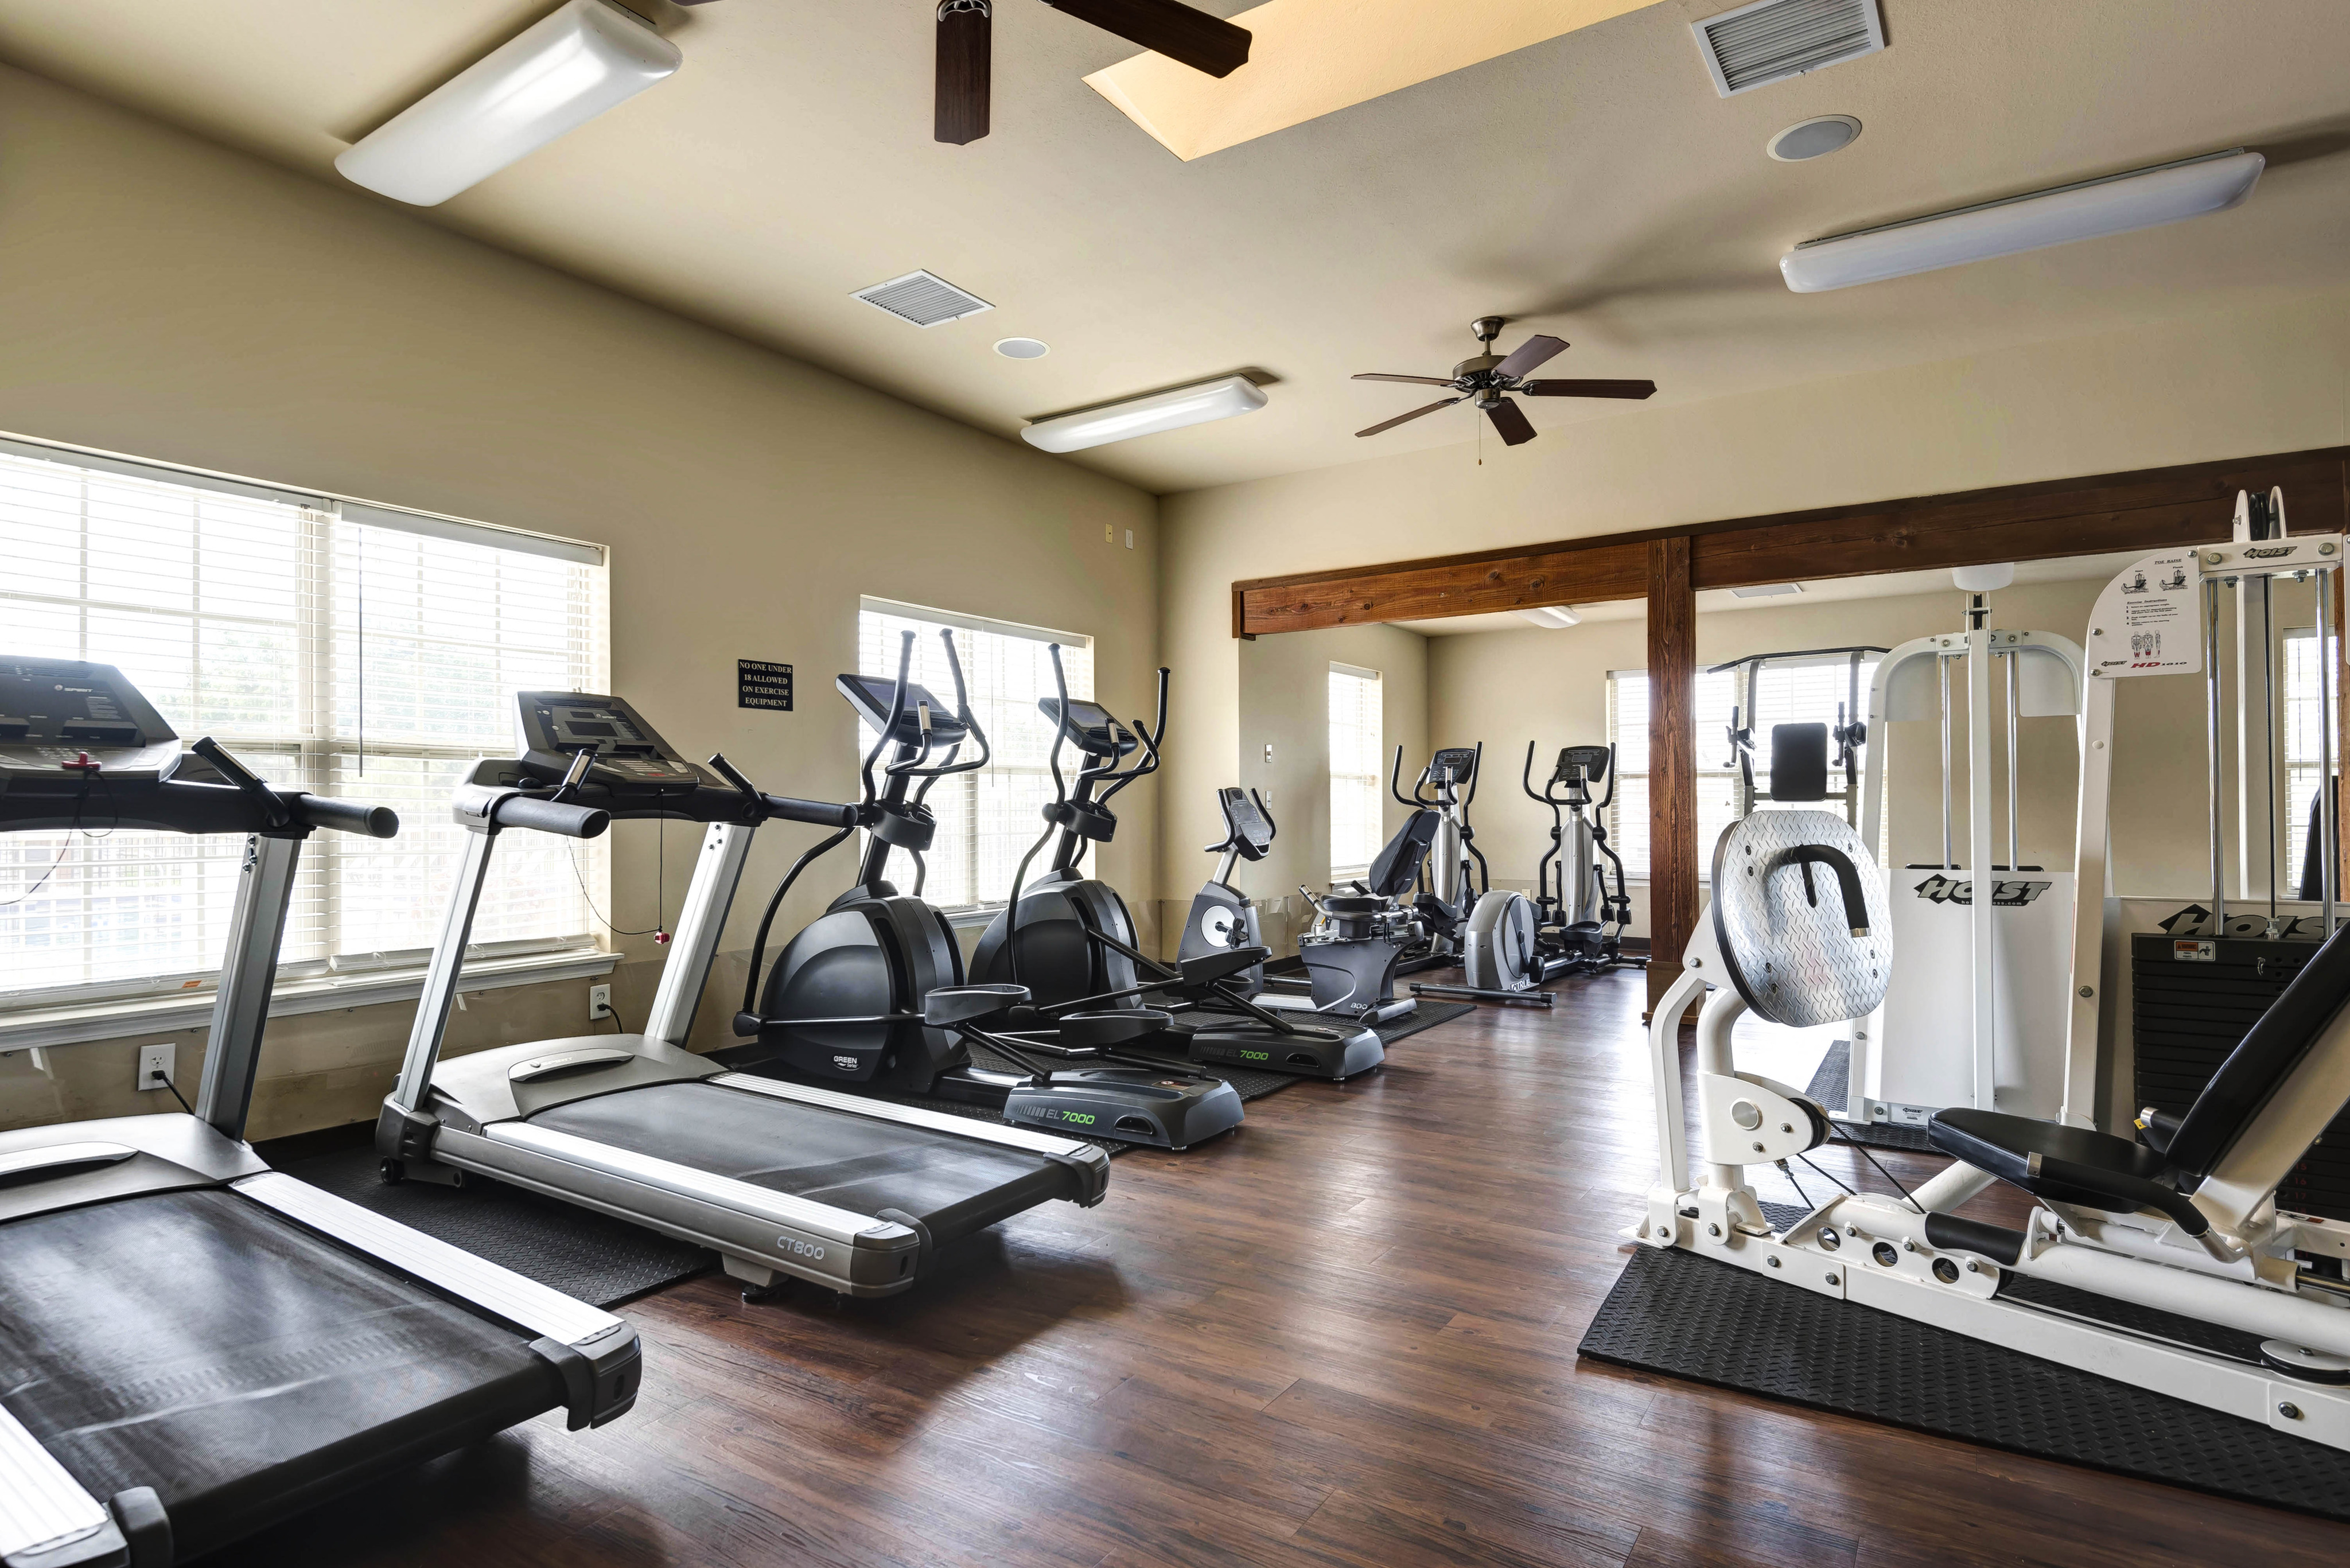 Coryell Courts fitness center with cardio equipment